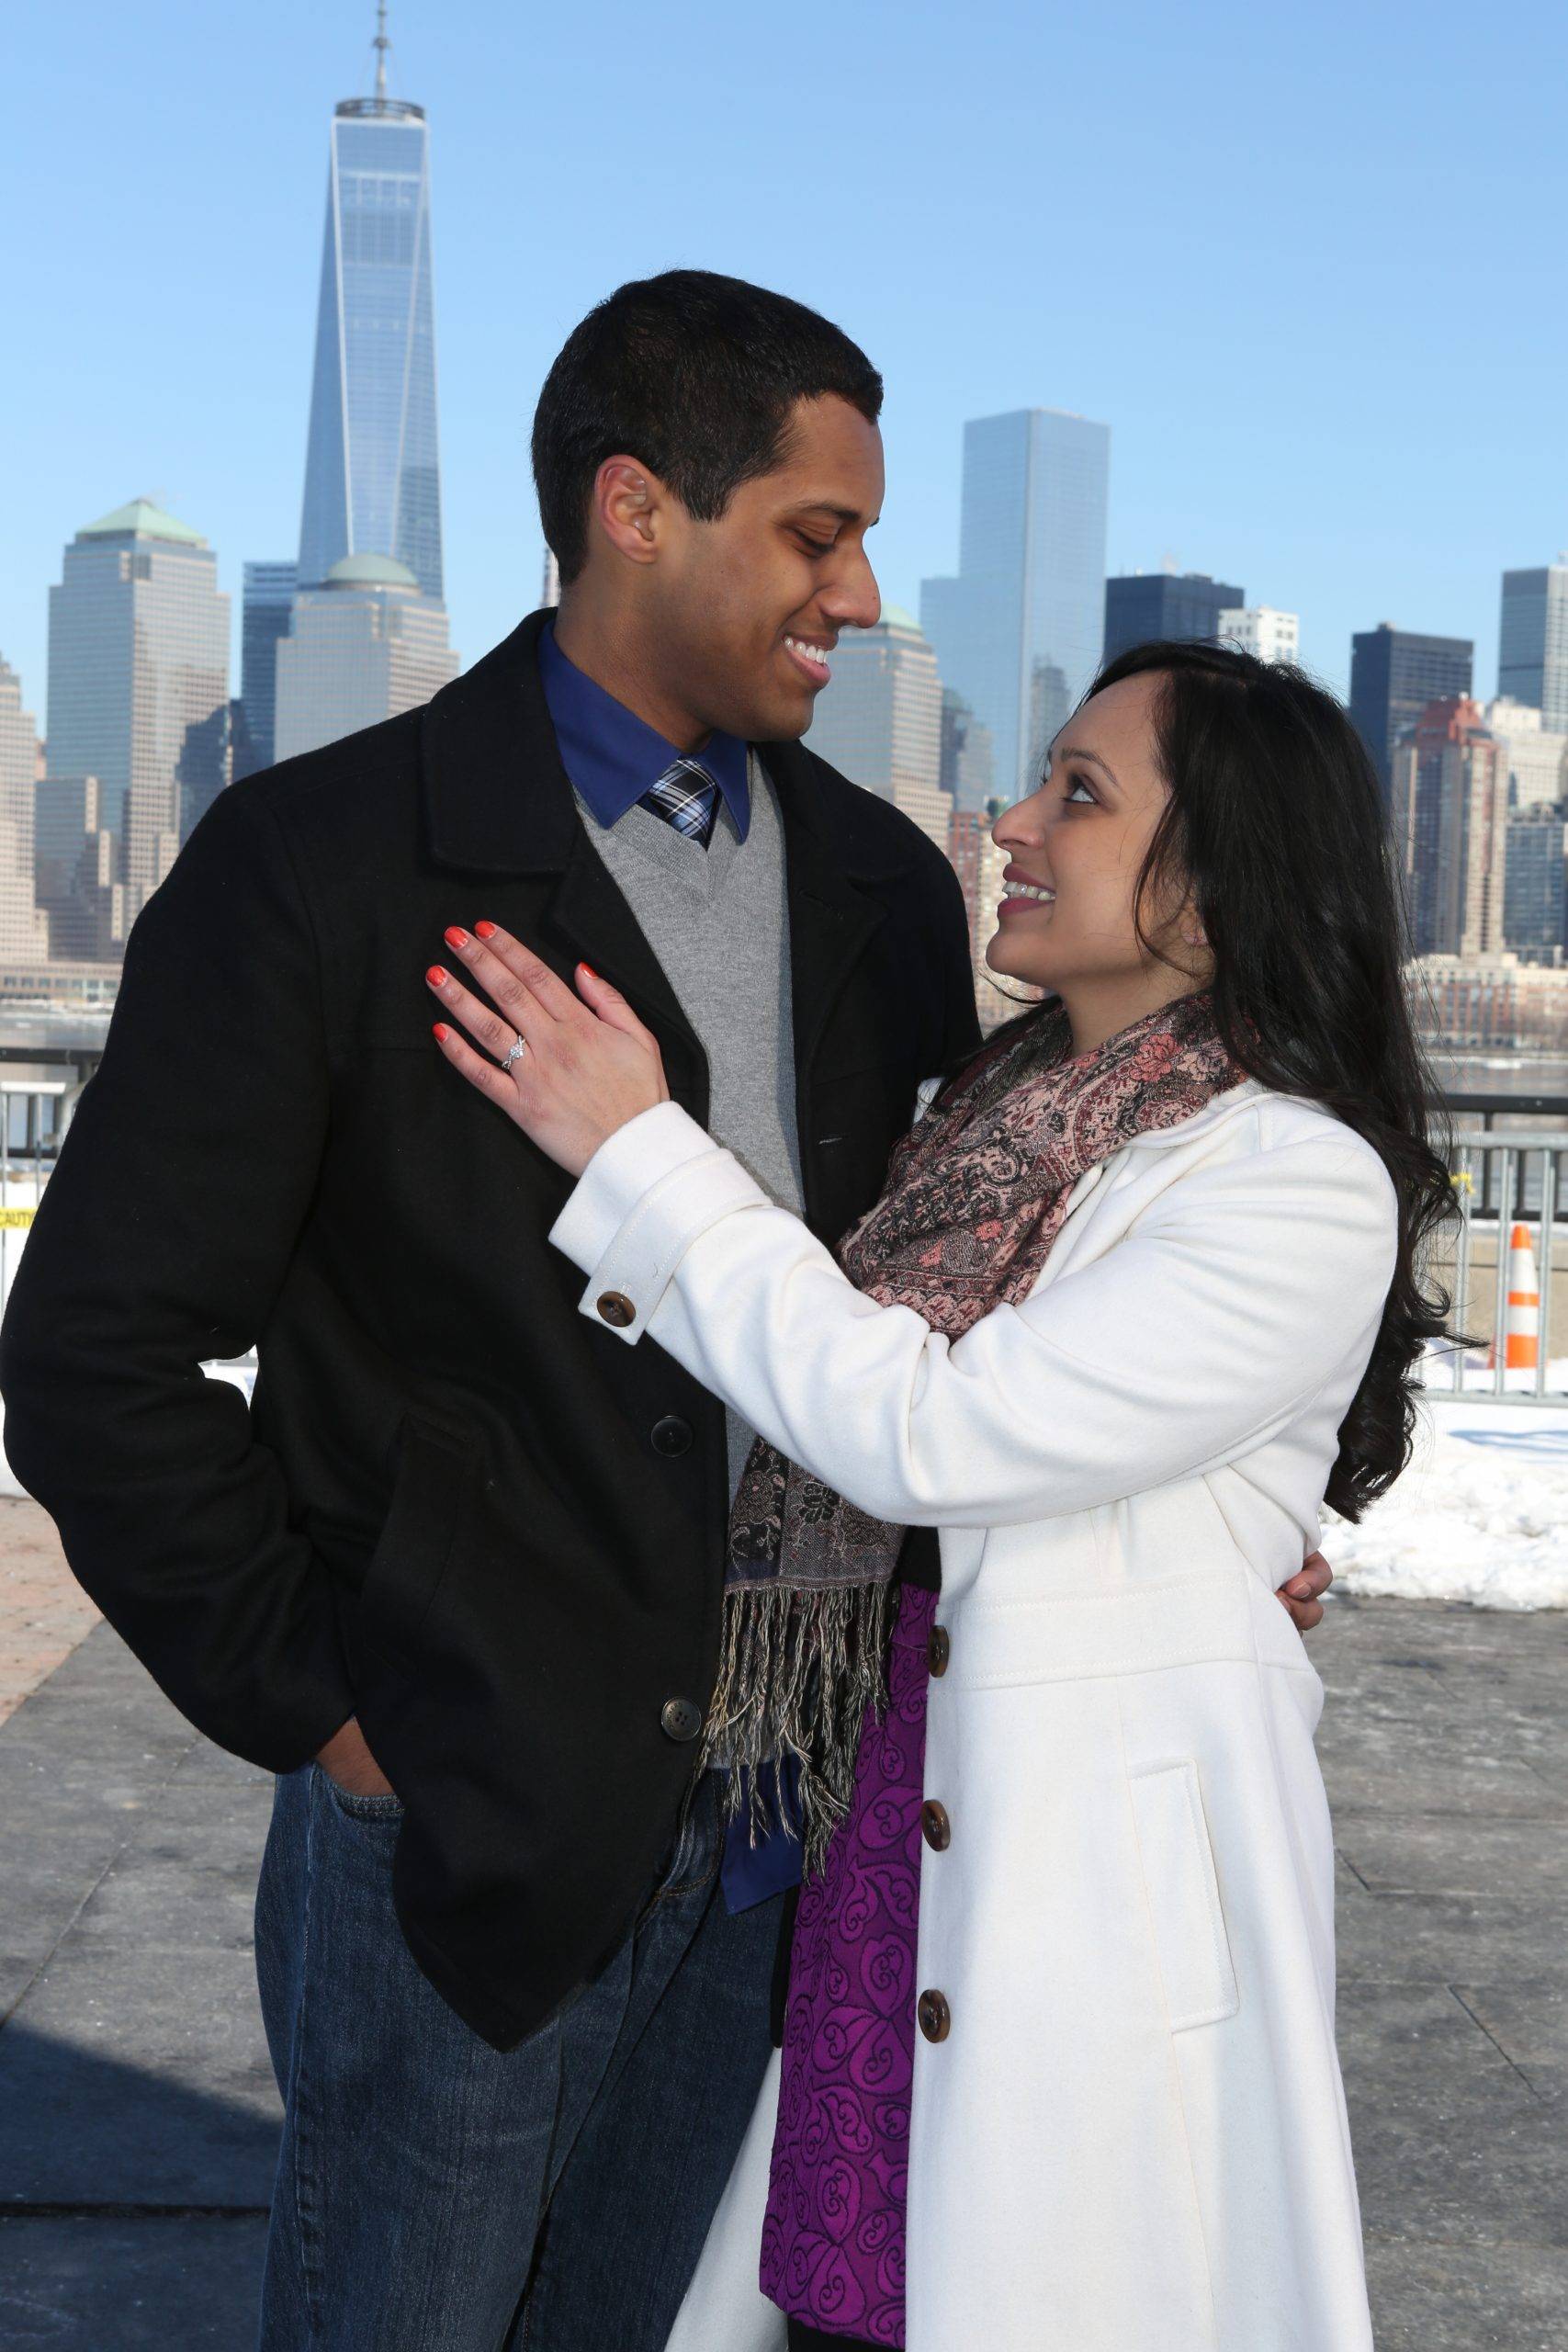 A man and woman standing in front of a city skyline.